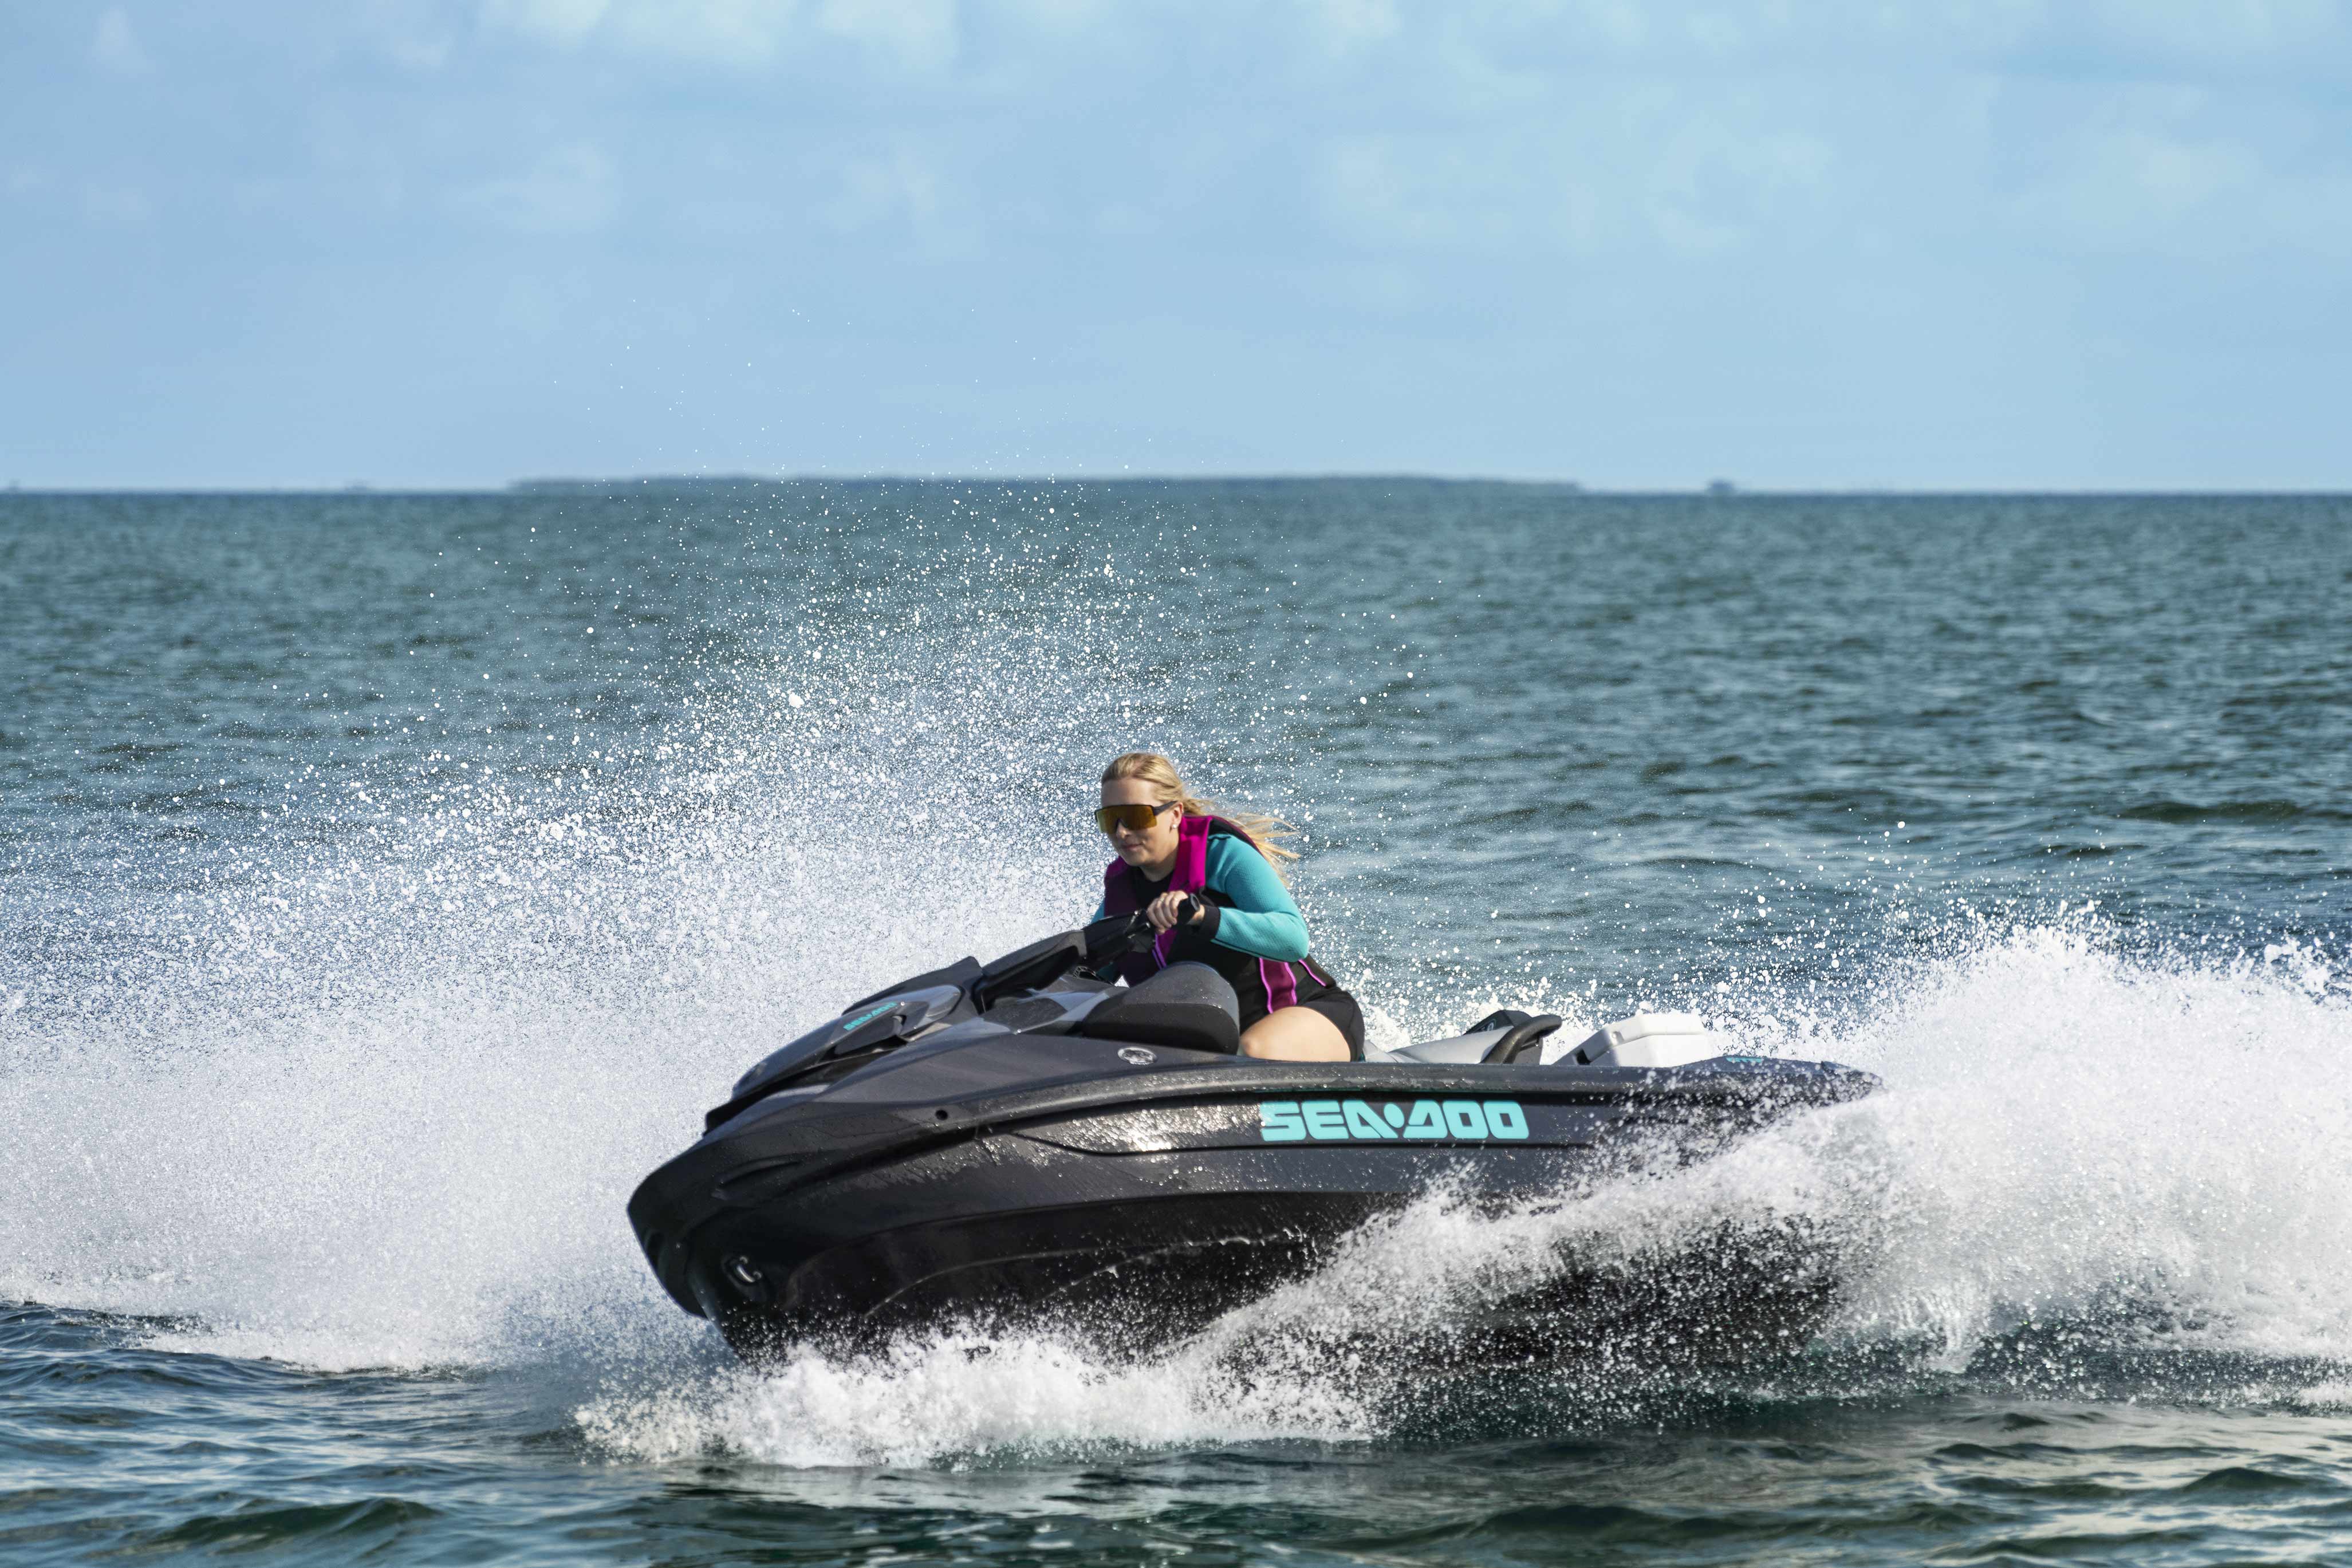 Woman riding a Sea-Doo personal watercraft at high speed